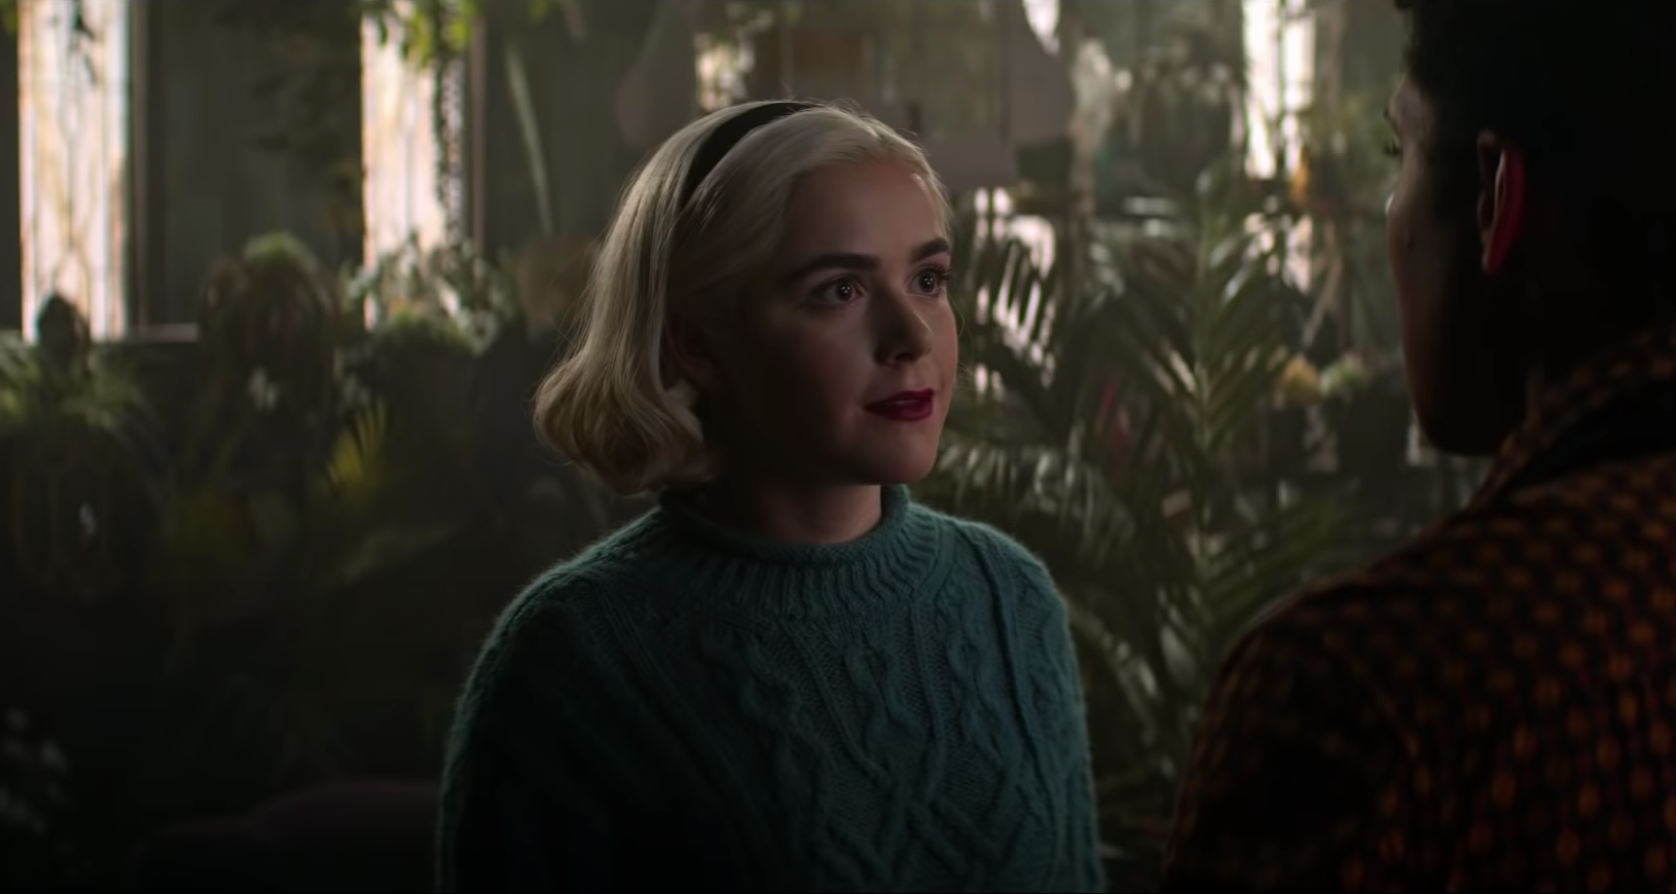 'Chilling Adventures of Sabrina' Part 4 Trailer: 11 Moments We Can't Stop Thinking About